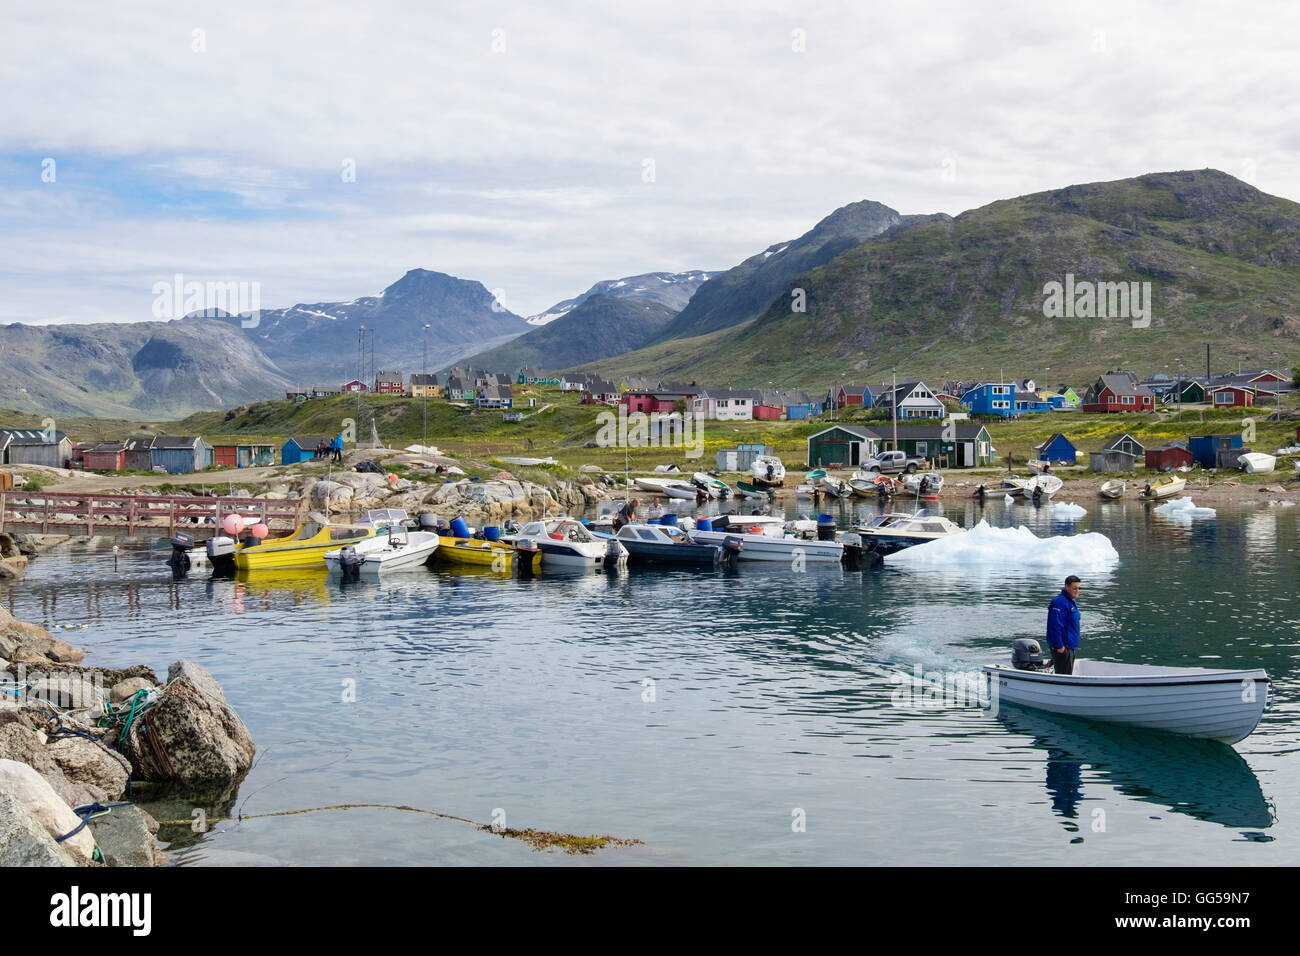 Small boats in harbour used by Inuit and locals for fishing and hunting in summer. Qajaq Harbour, Narsaq, Kujalleq, Southern Greenland Stock Photo